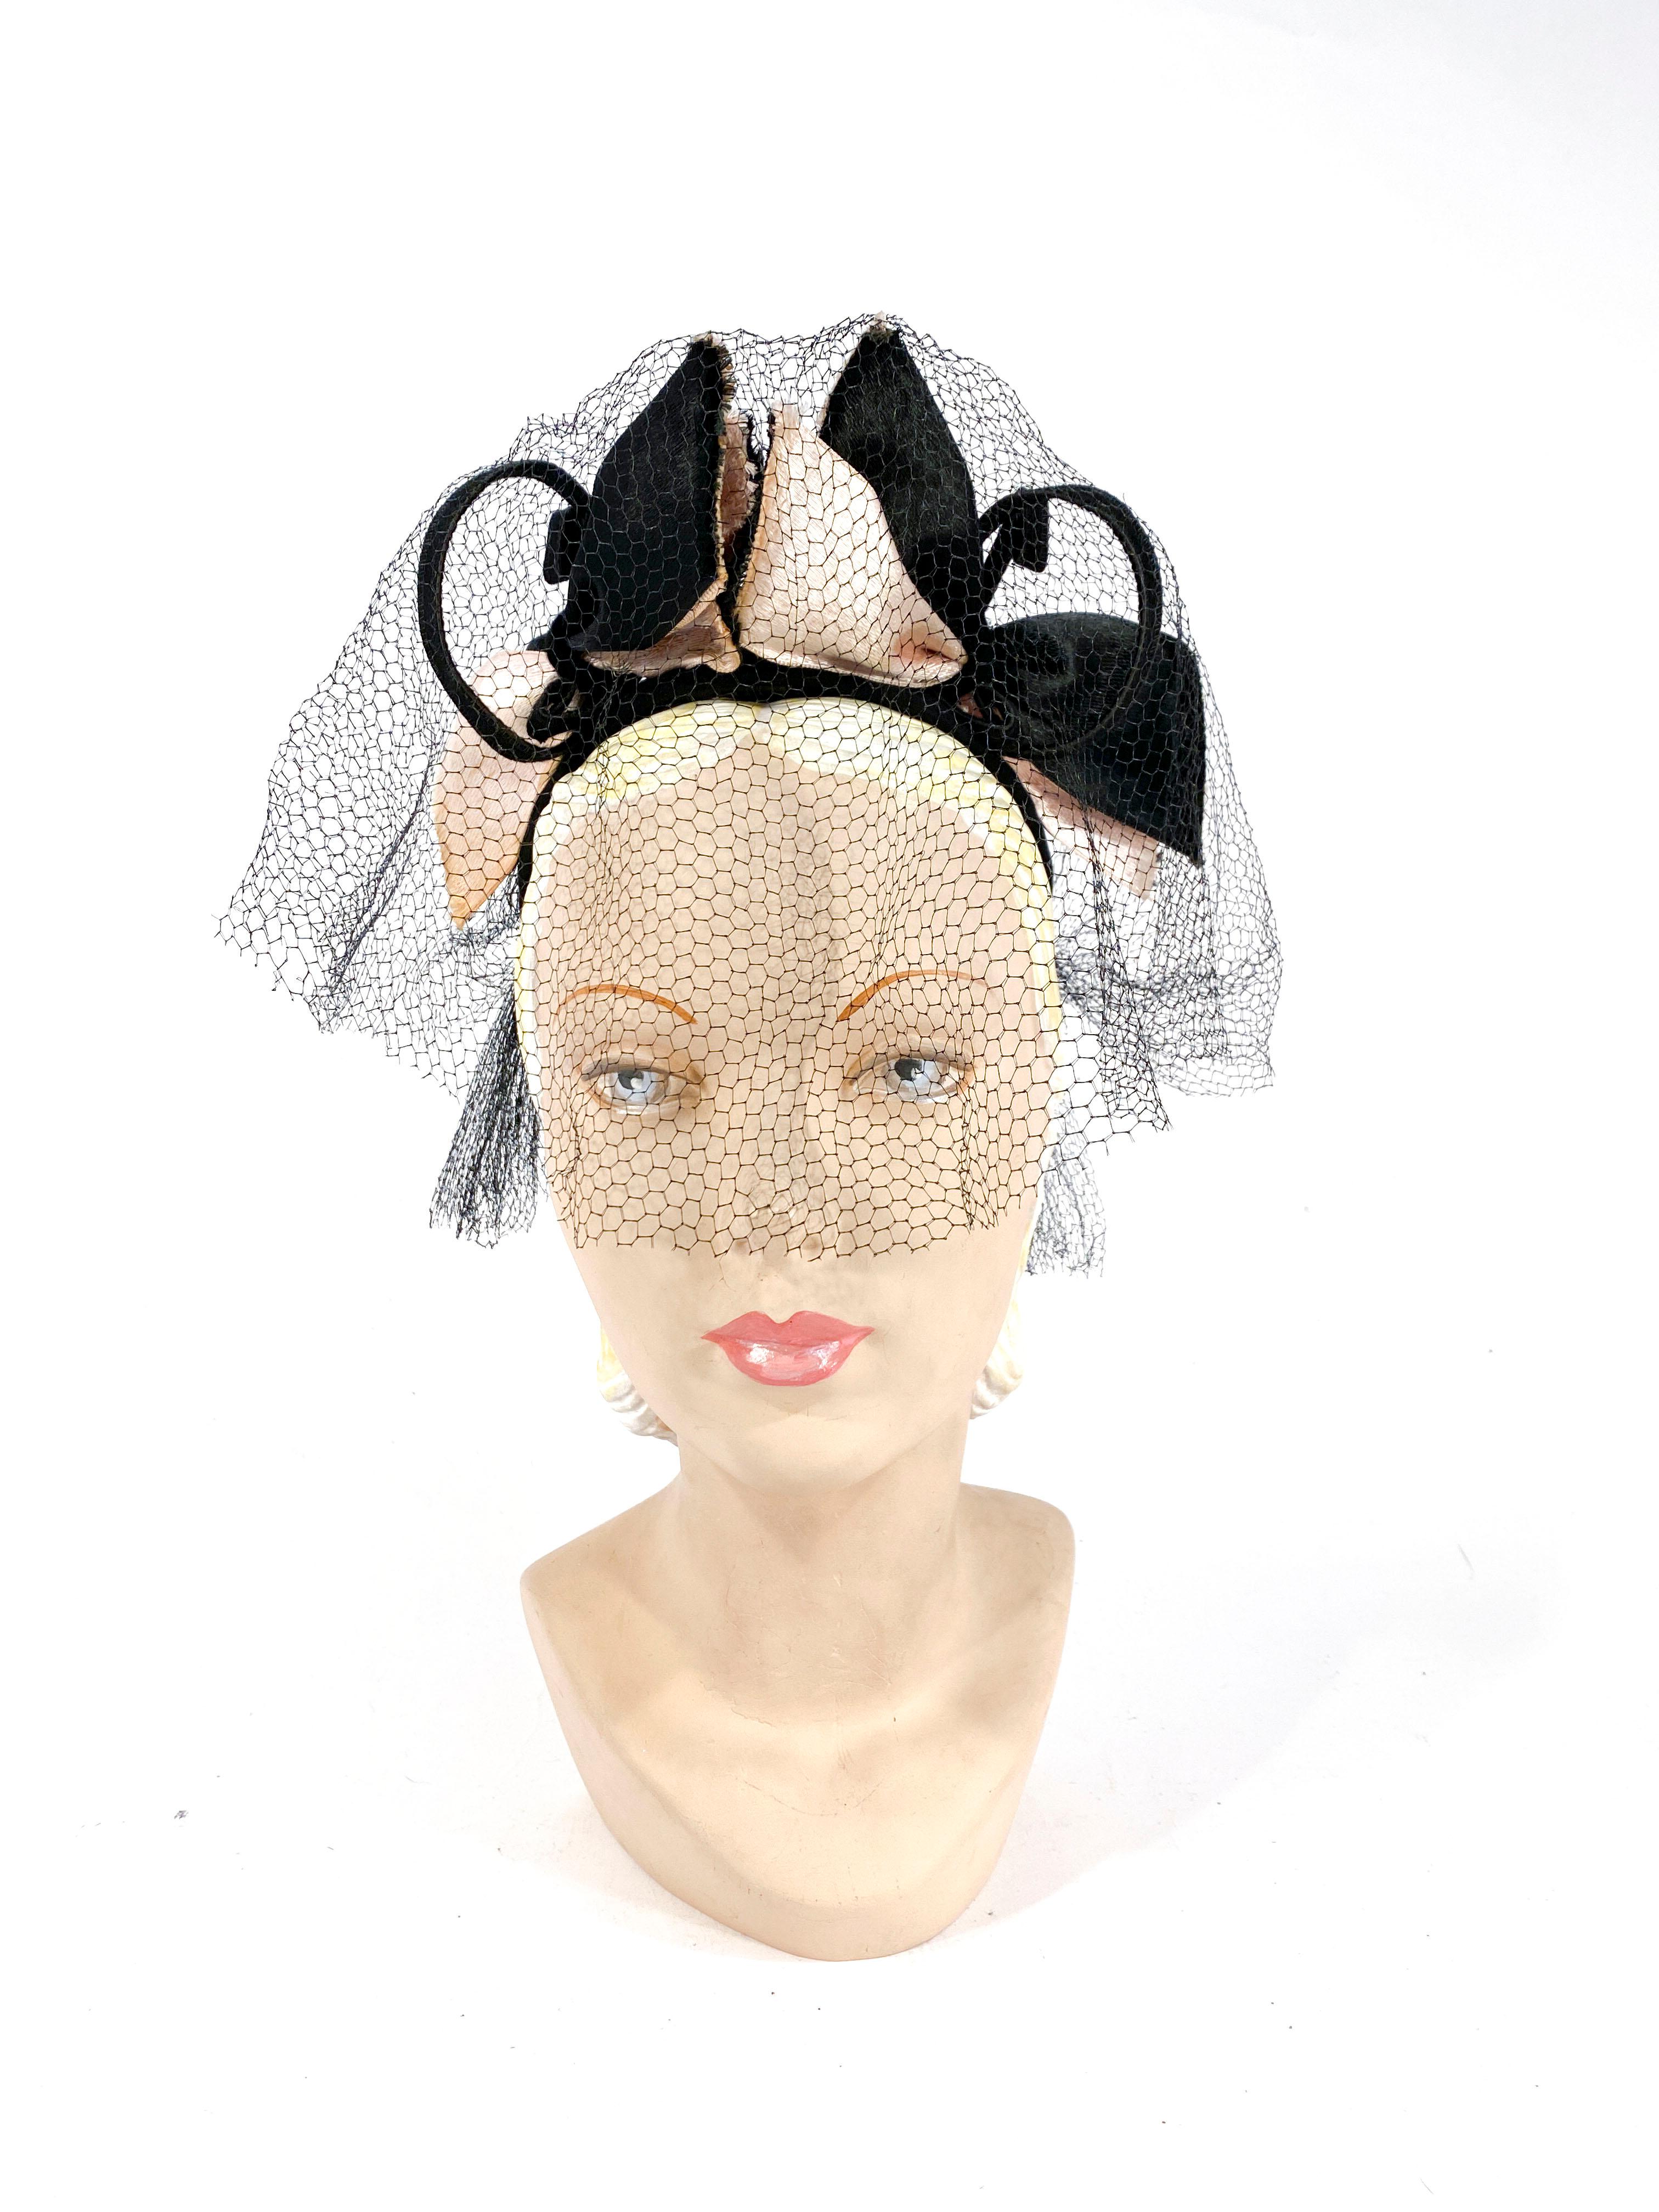 1930s black sculpted hat with light pink and black satin bows adorned with wired hoops. The veil covers the eyes and nose. 